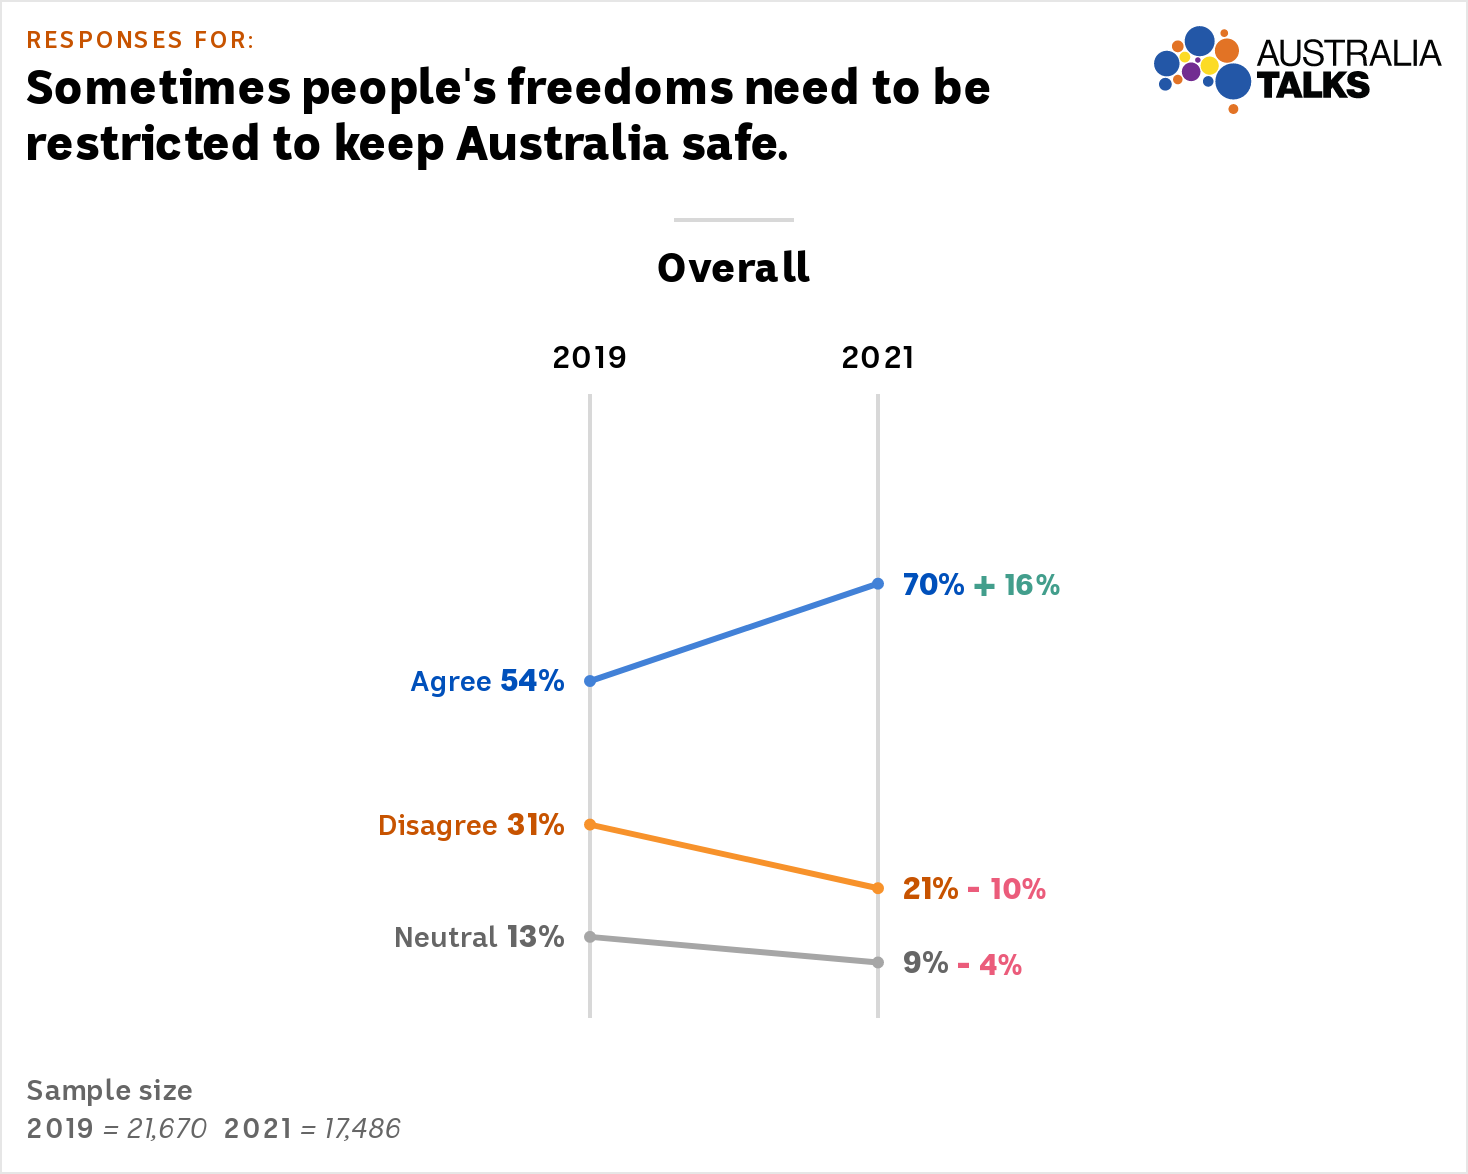 Charts show the proportion of people who disagree (2019: 31%, 2021: 21%) and agree (2019: 54%, 2021: 70%).